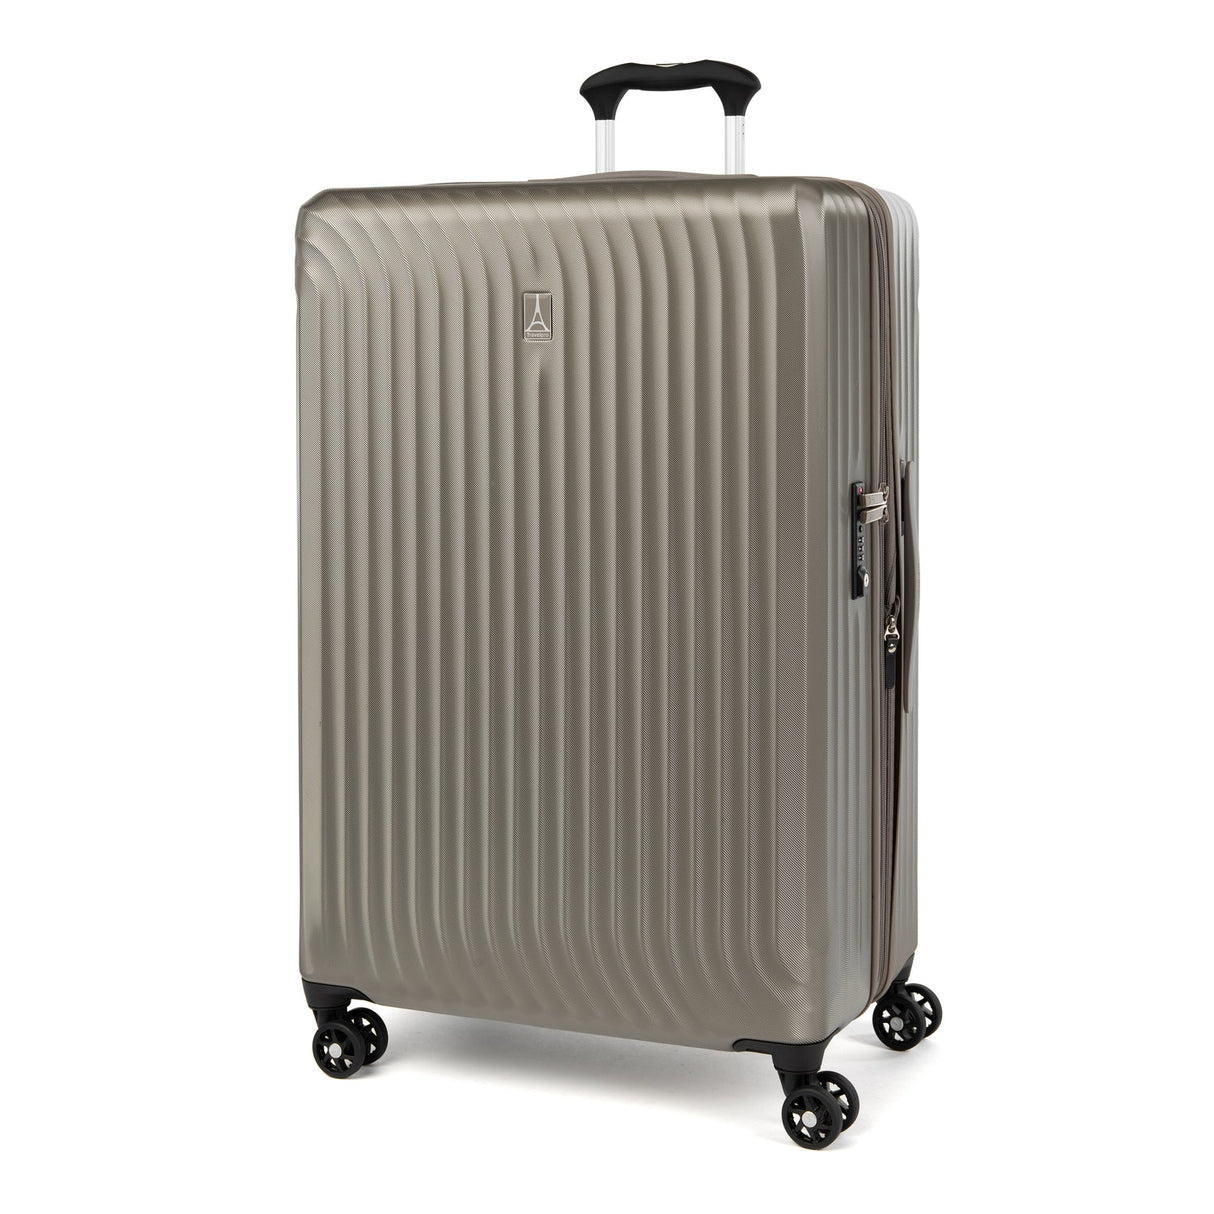 Travelpro Maxlite Air Large Check-In Expandable Hardside Spinner , , 401229935_front-1500x1500-d707c29_1024x1024_2x_2ffdefcb-8a51-4b46-99cd-8cae06b50815